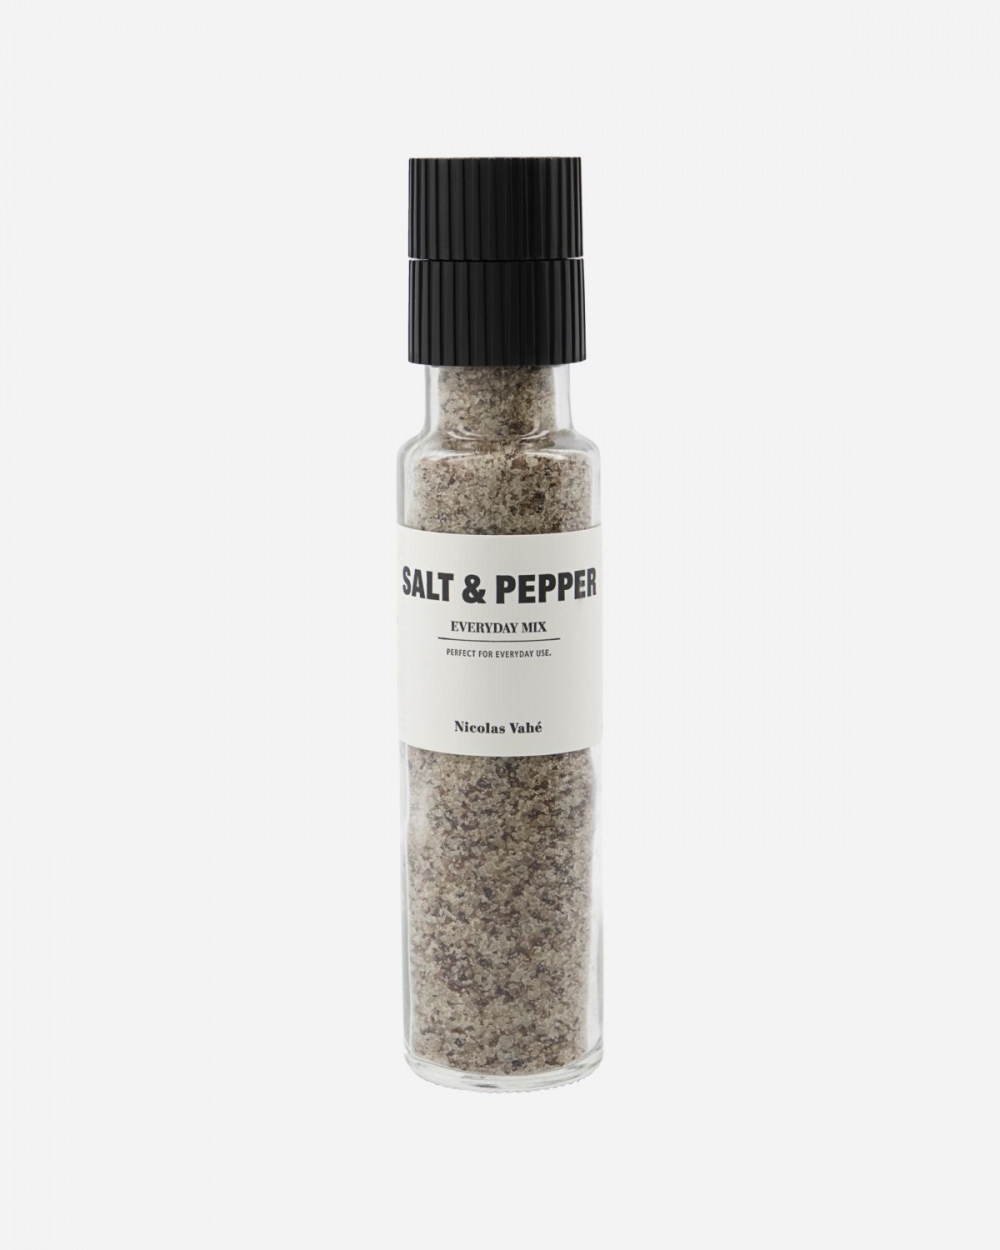 An everyday essential for your cooking and dinner table. The Everyday Mix from Nicolas Vahé is a blend of salt and pepper. Pretty basic but something you'll miss if you don't have it. So make sure to leave this mill out on the table, so your guests can fl